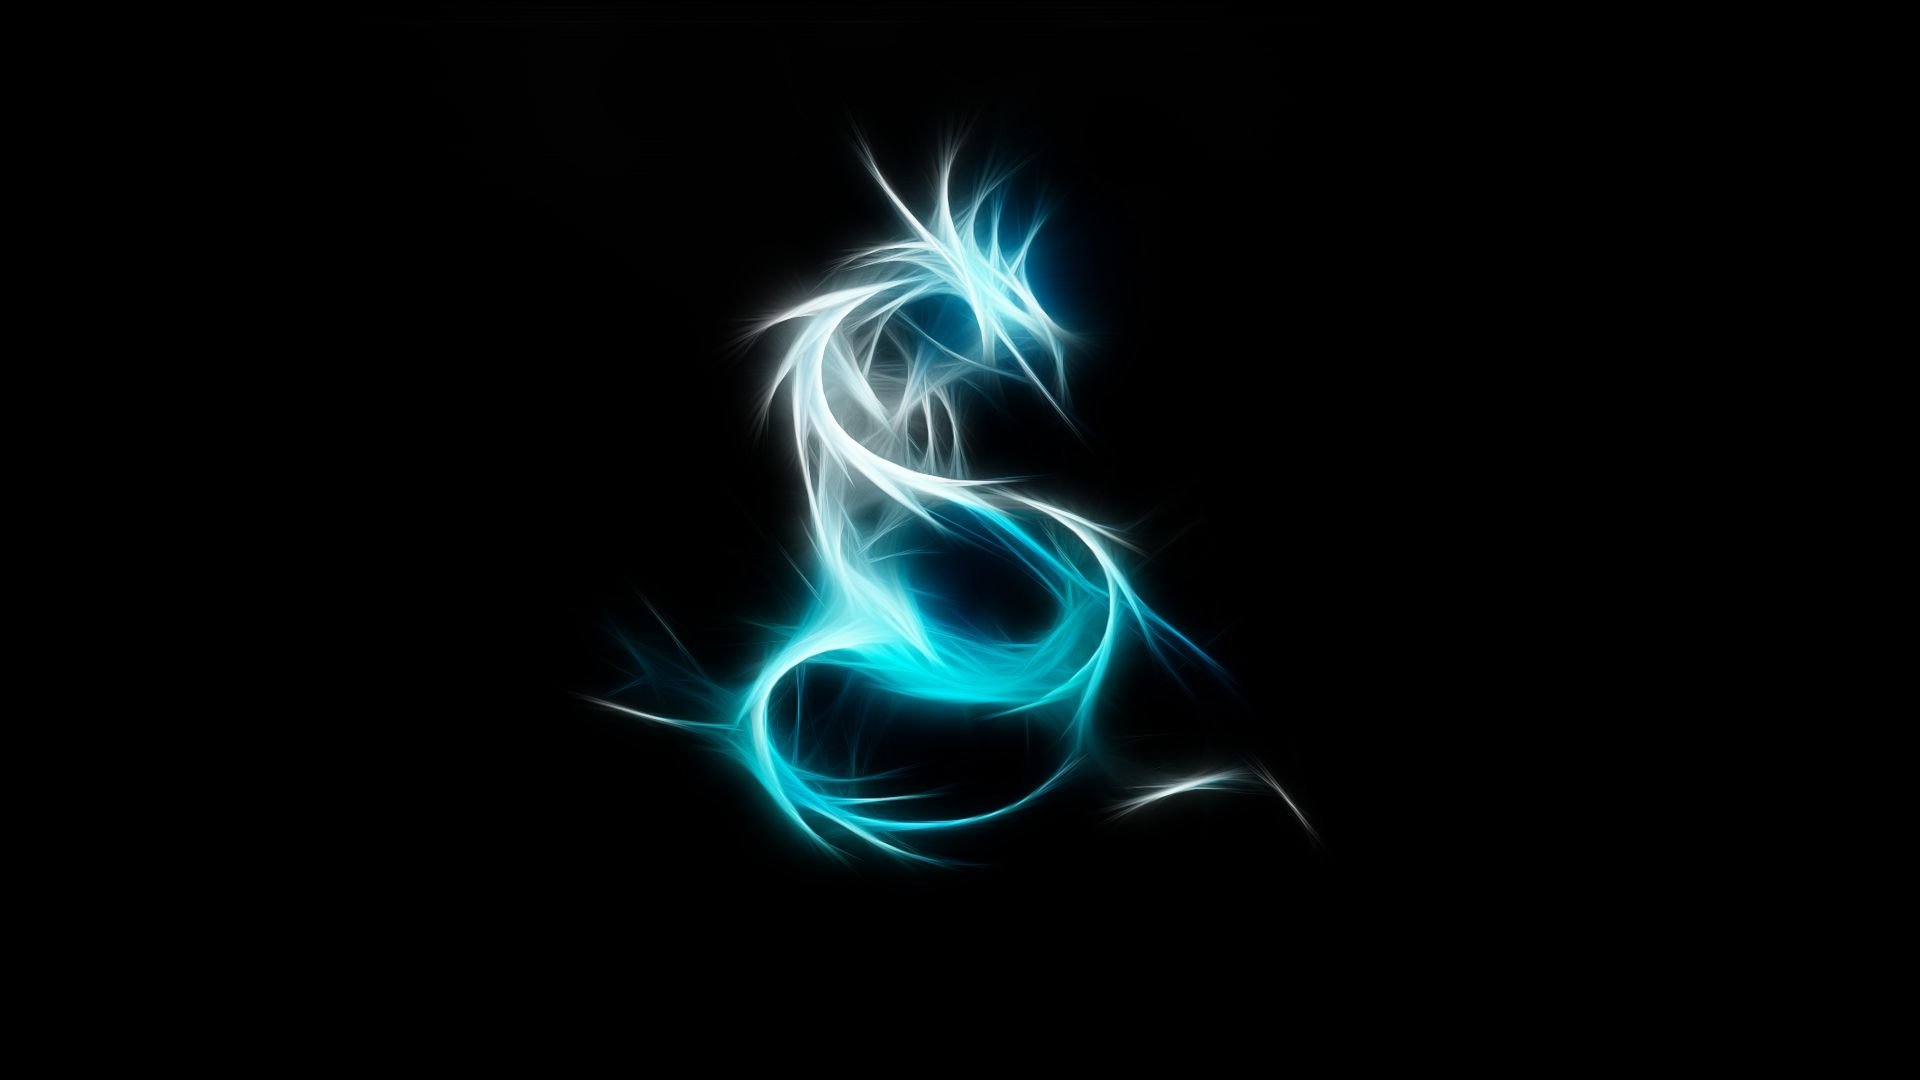 Blue Dragon Phone Background. Awesome Dragon Wallpaper, Cute Dragon Wallpaper and Amazing Dragon Wallpaper